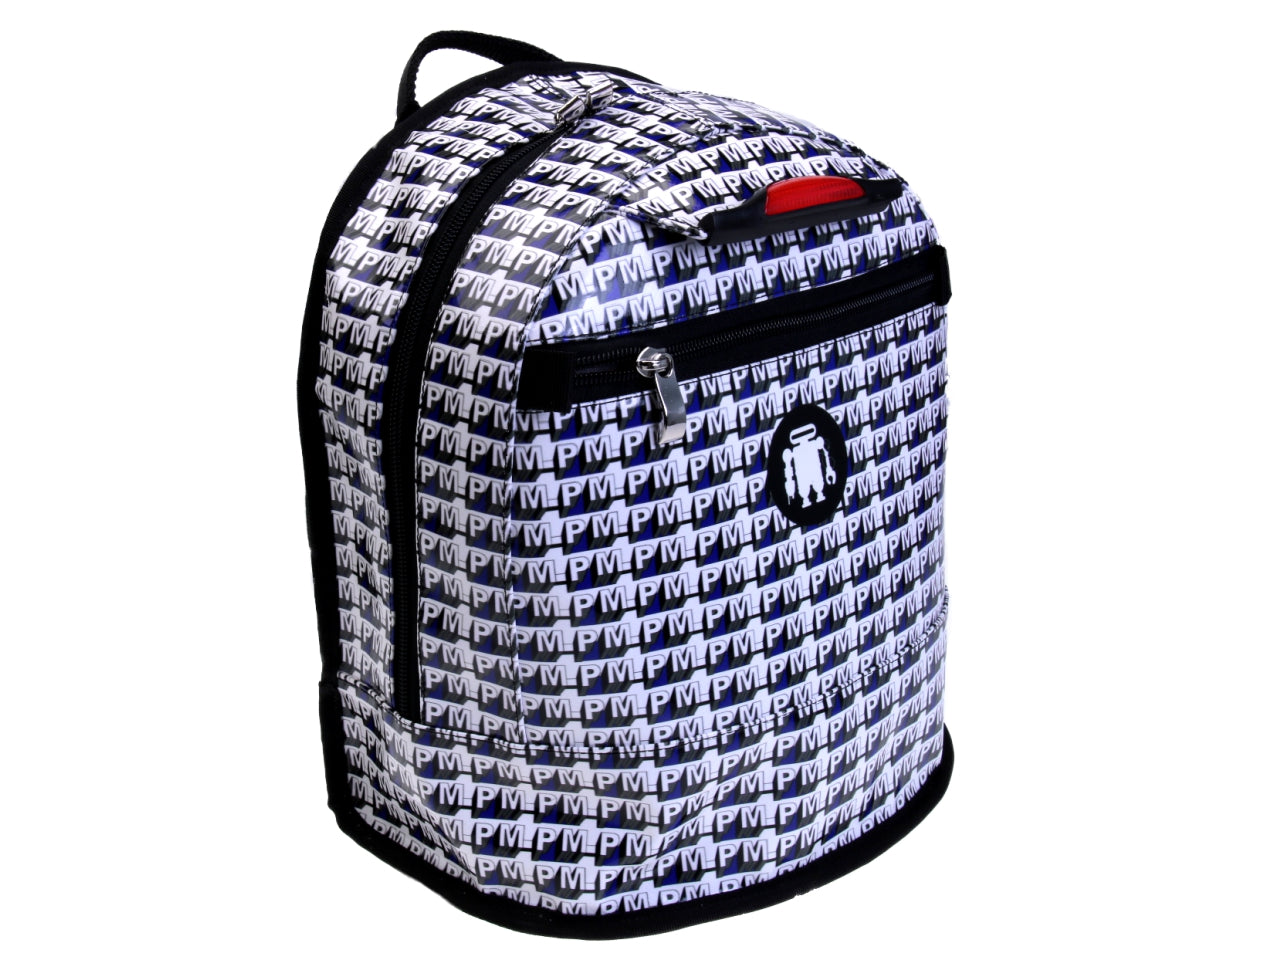 BACKPACK WHITE, GREY AND ROYAL COLOURS. MODEL SUPERINO MADE OF LORRY TARPAULIN. - Limited Edition Paul Meccanico